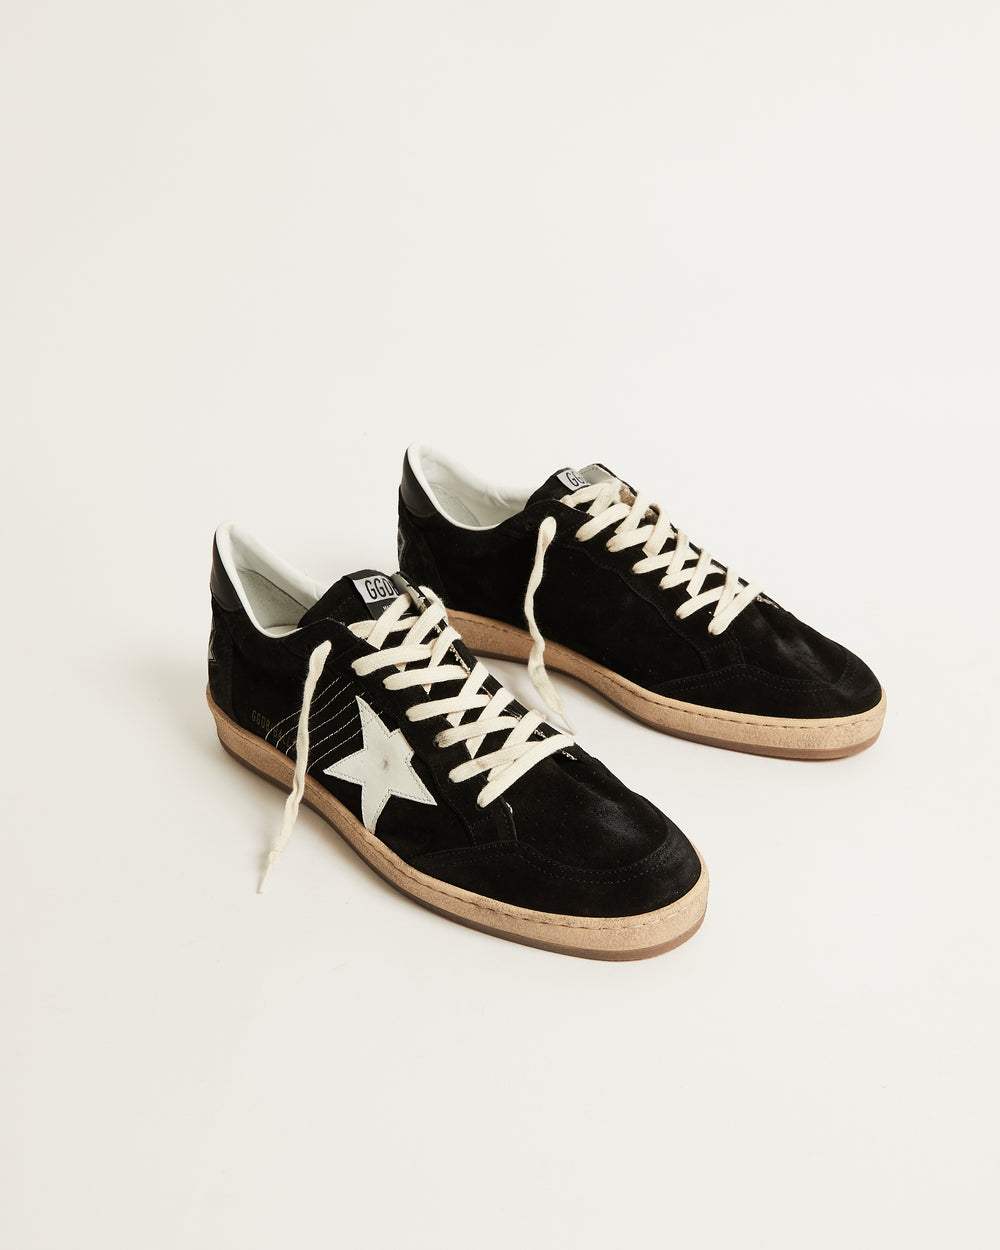 Men's Ball Star in Black Suede w/ White Leather Star